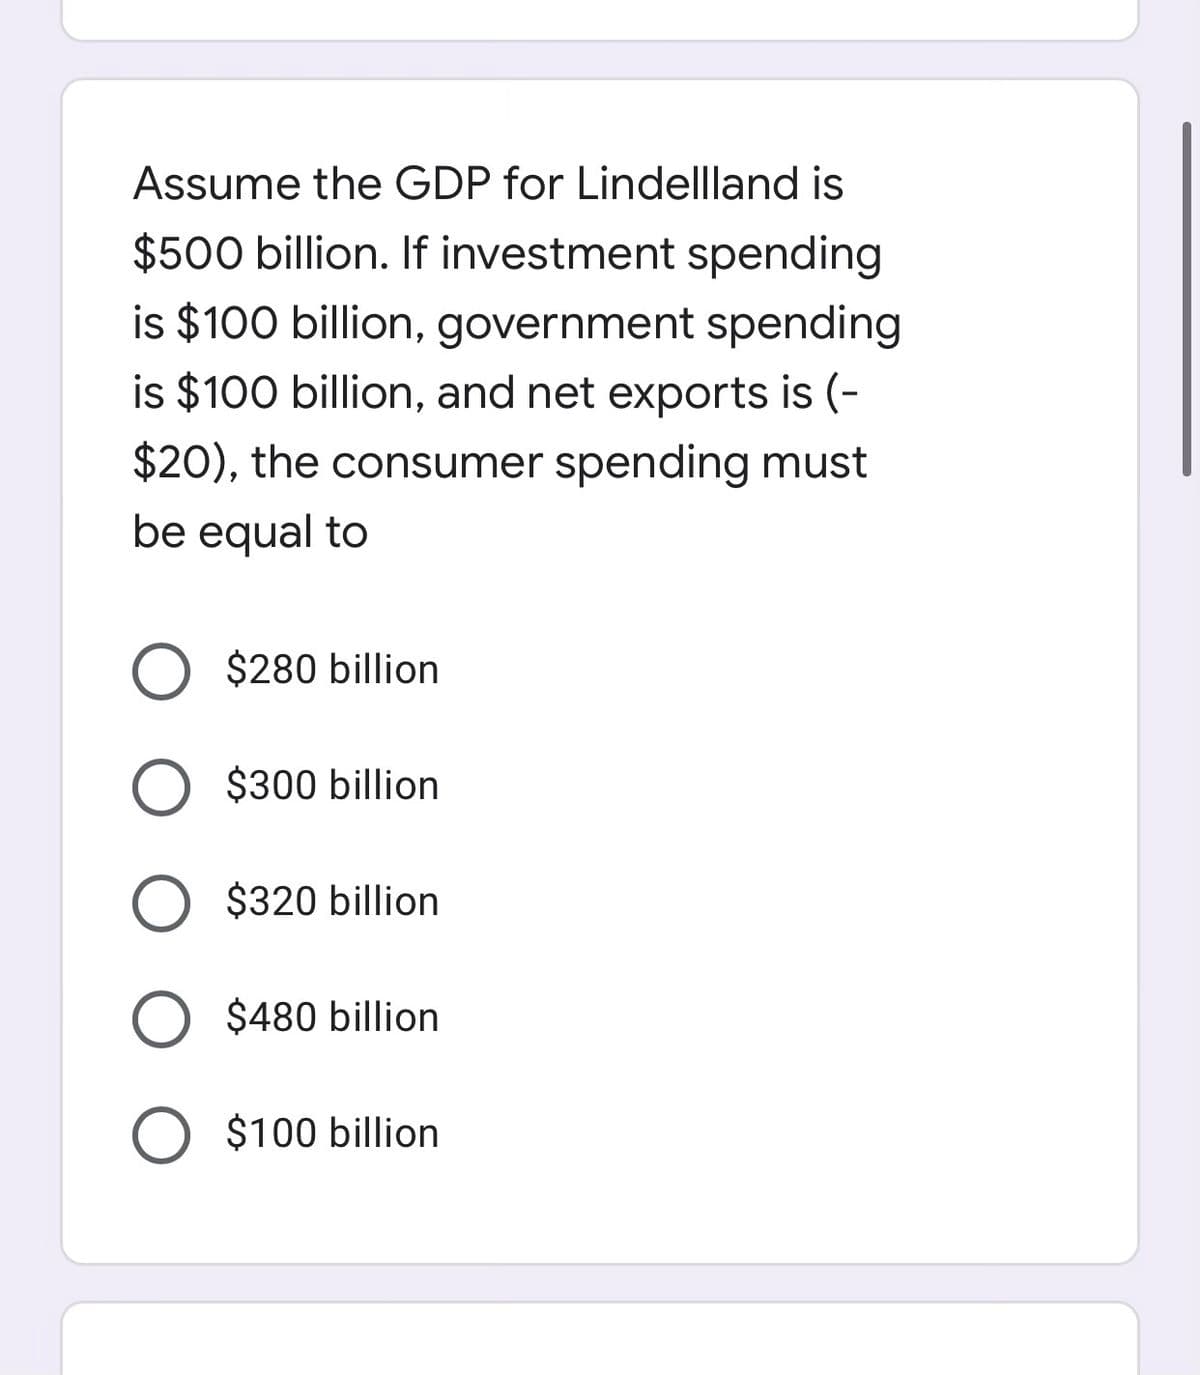 Assume the GDP for Lindellland is
$500 billion. If investment spending
is $100 billion, government spending
is $100 billion, and net exports is (-
$20), the consumer spending must
be equal to
O $280 billion
O $300 billion
O $320 billion
$480 billion
O $100 billion
